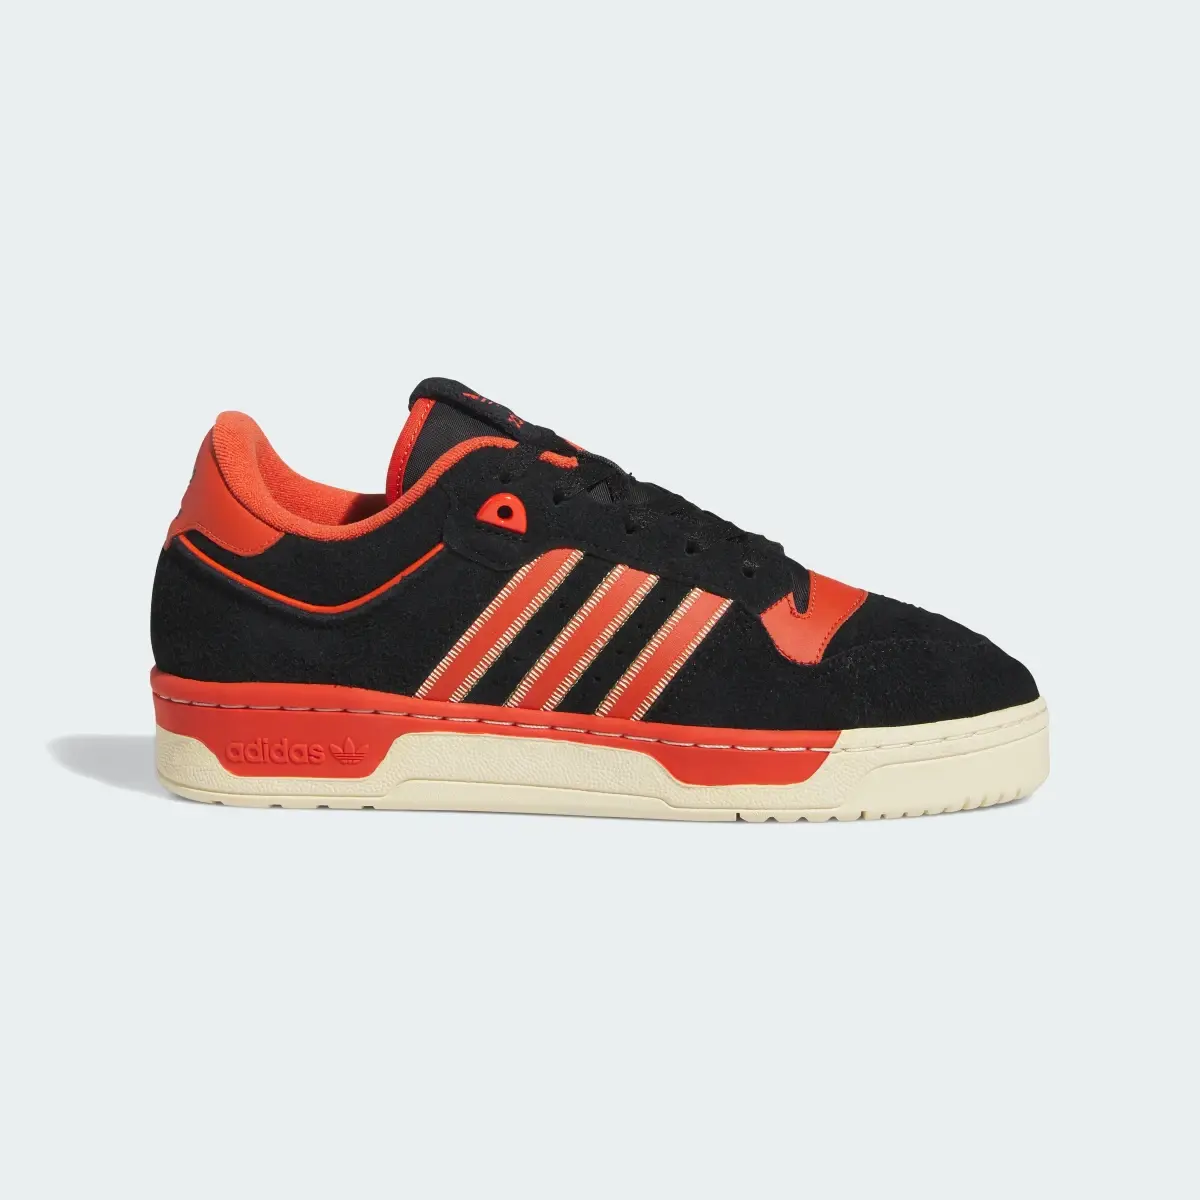 Adidas Rivalry 86 Low Shoes. 2